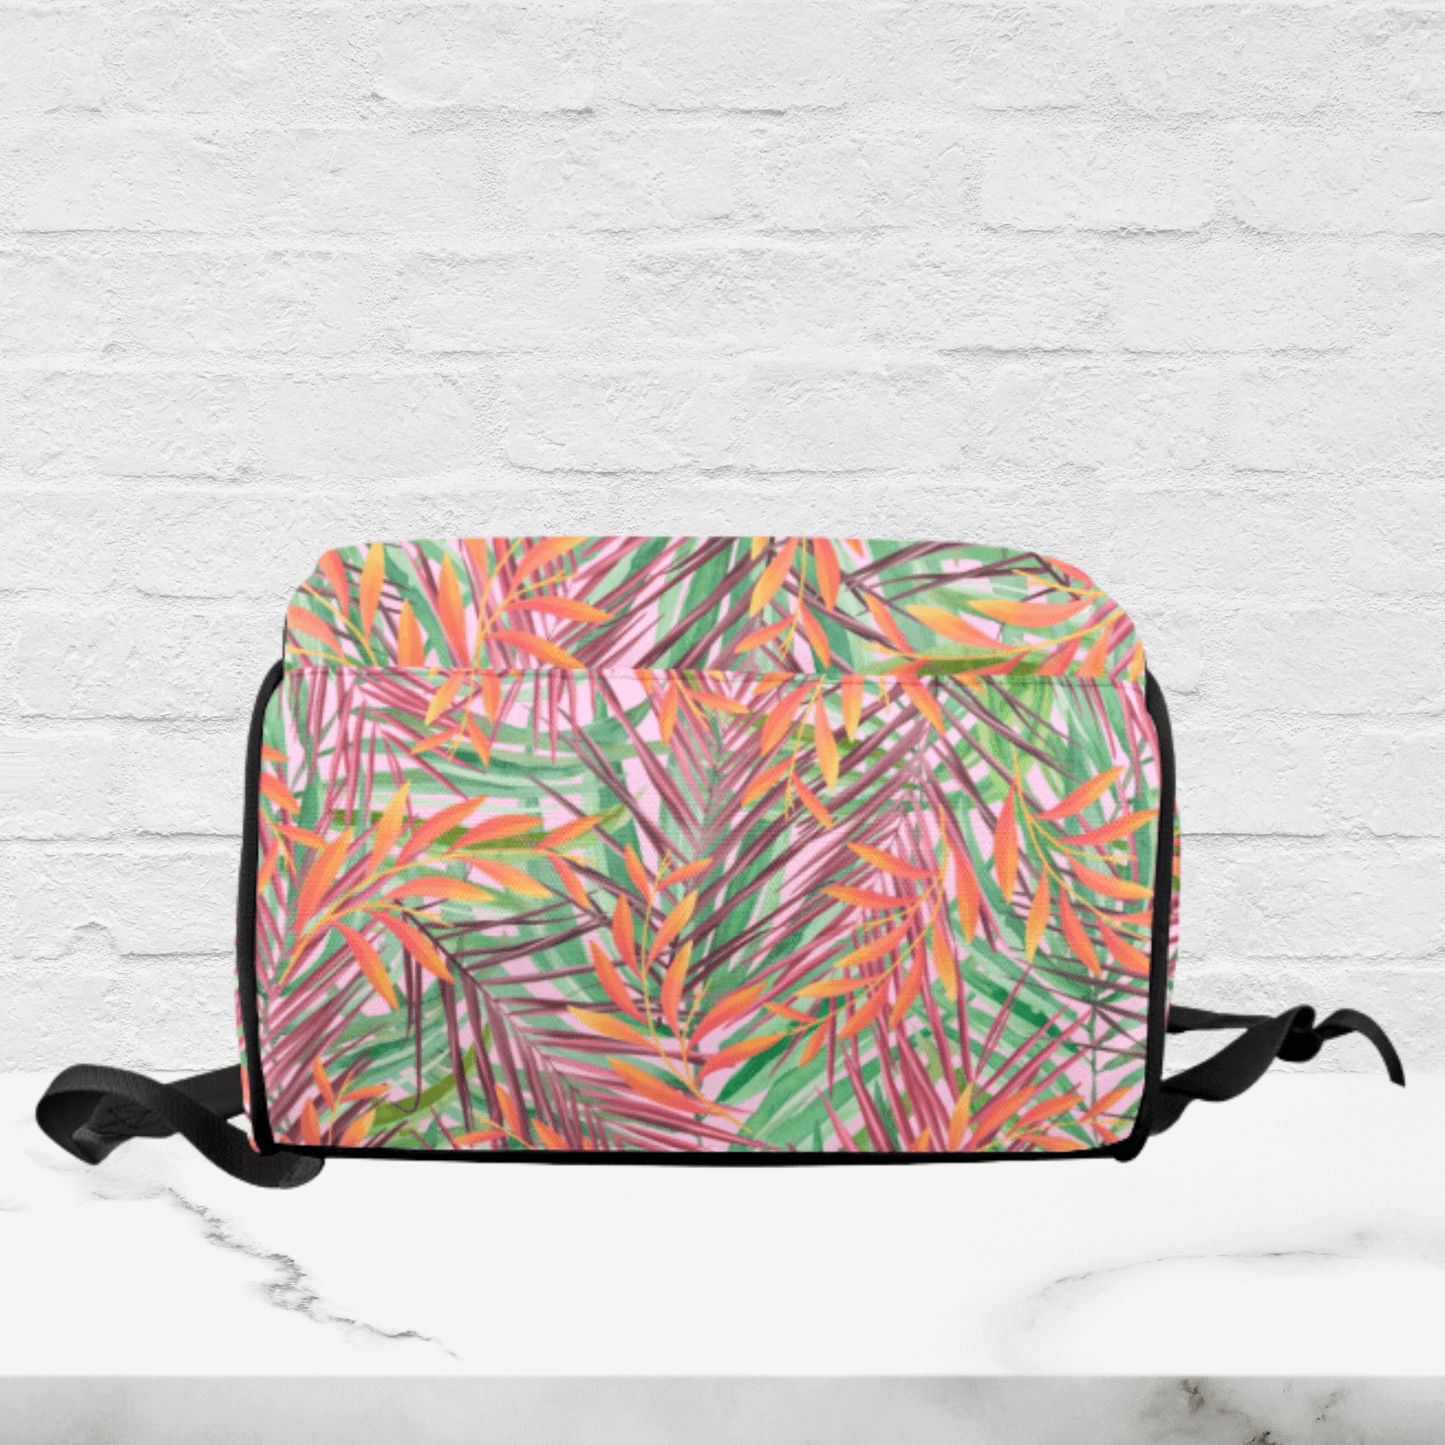 The bottom of the diaper bag is the tropical print design.